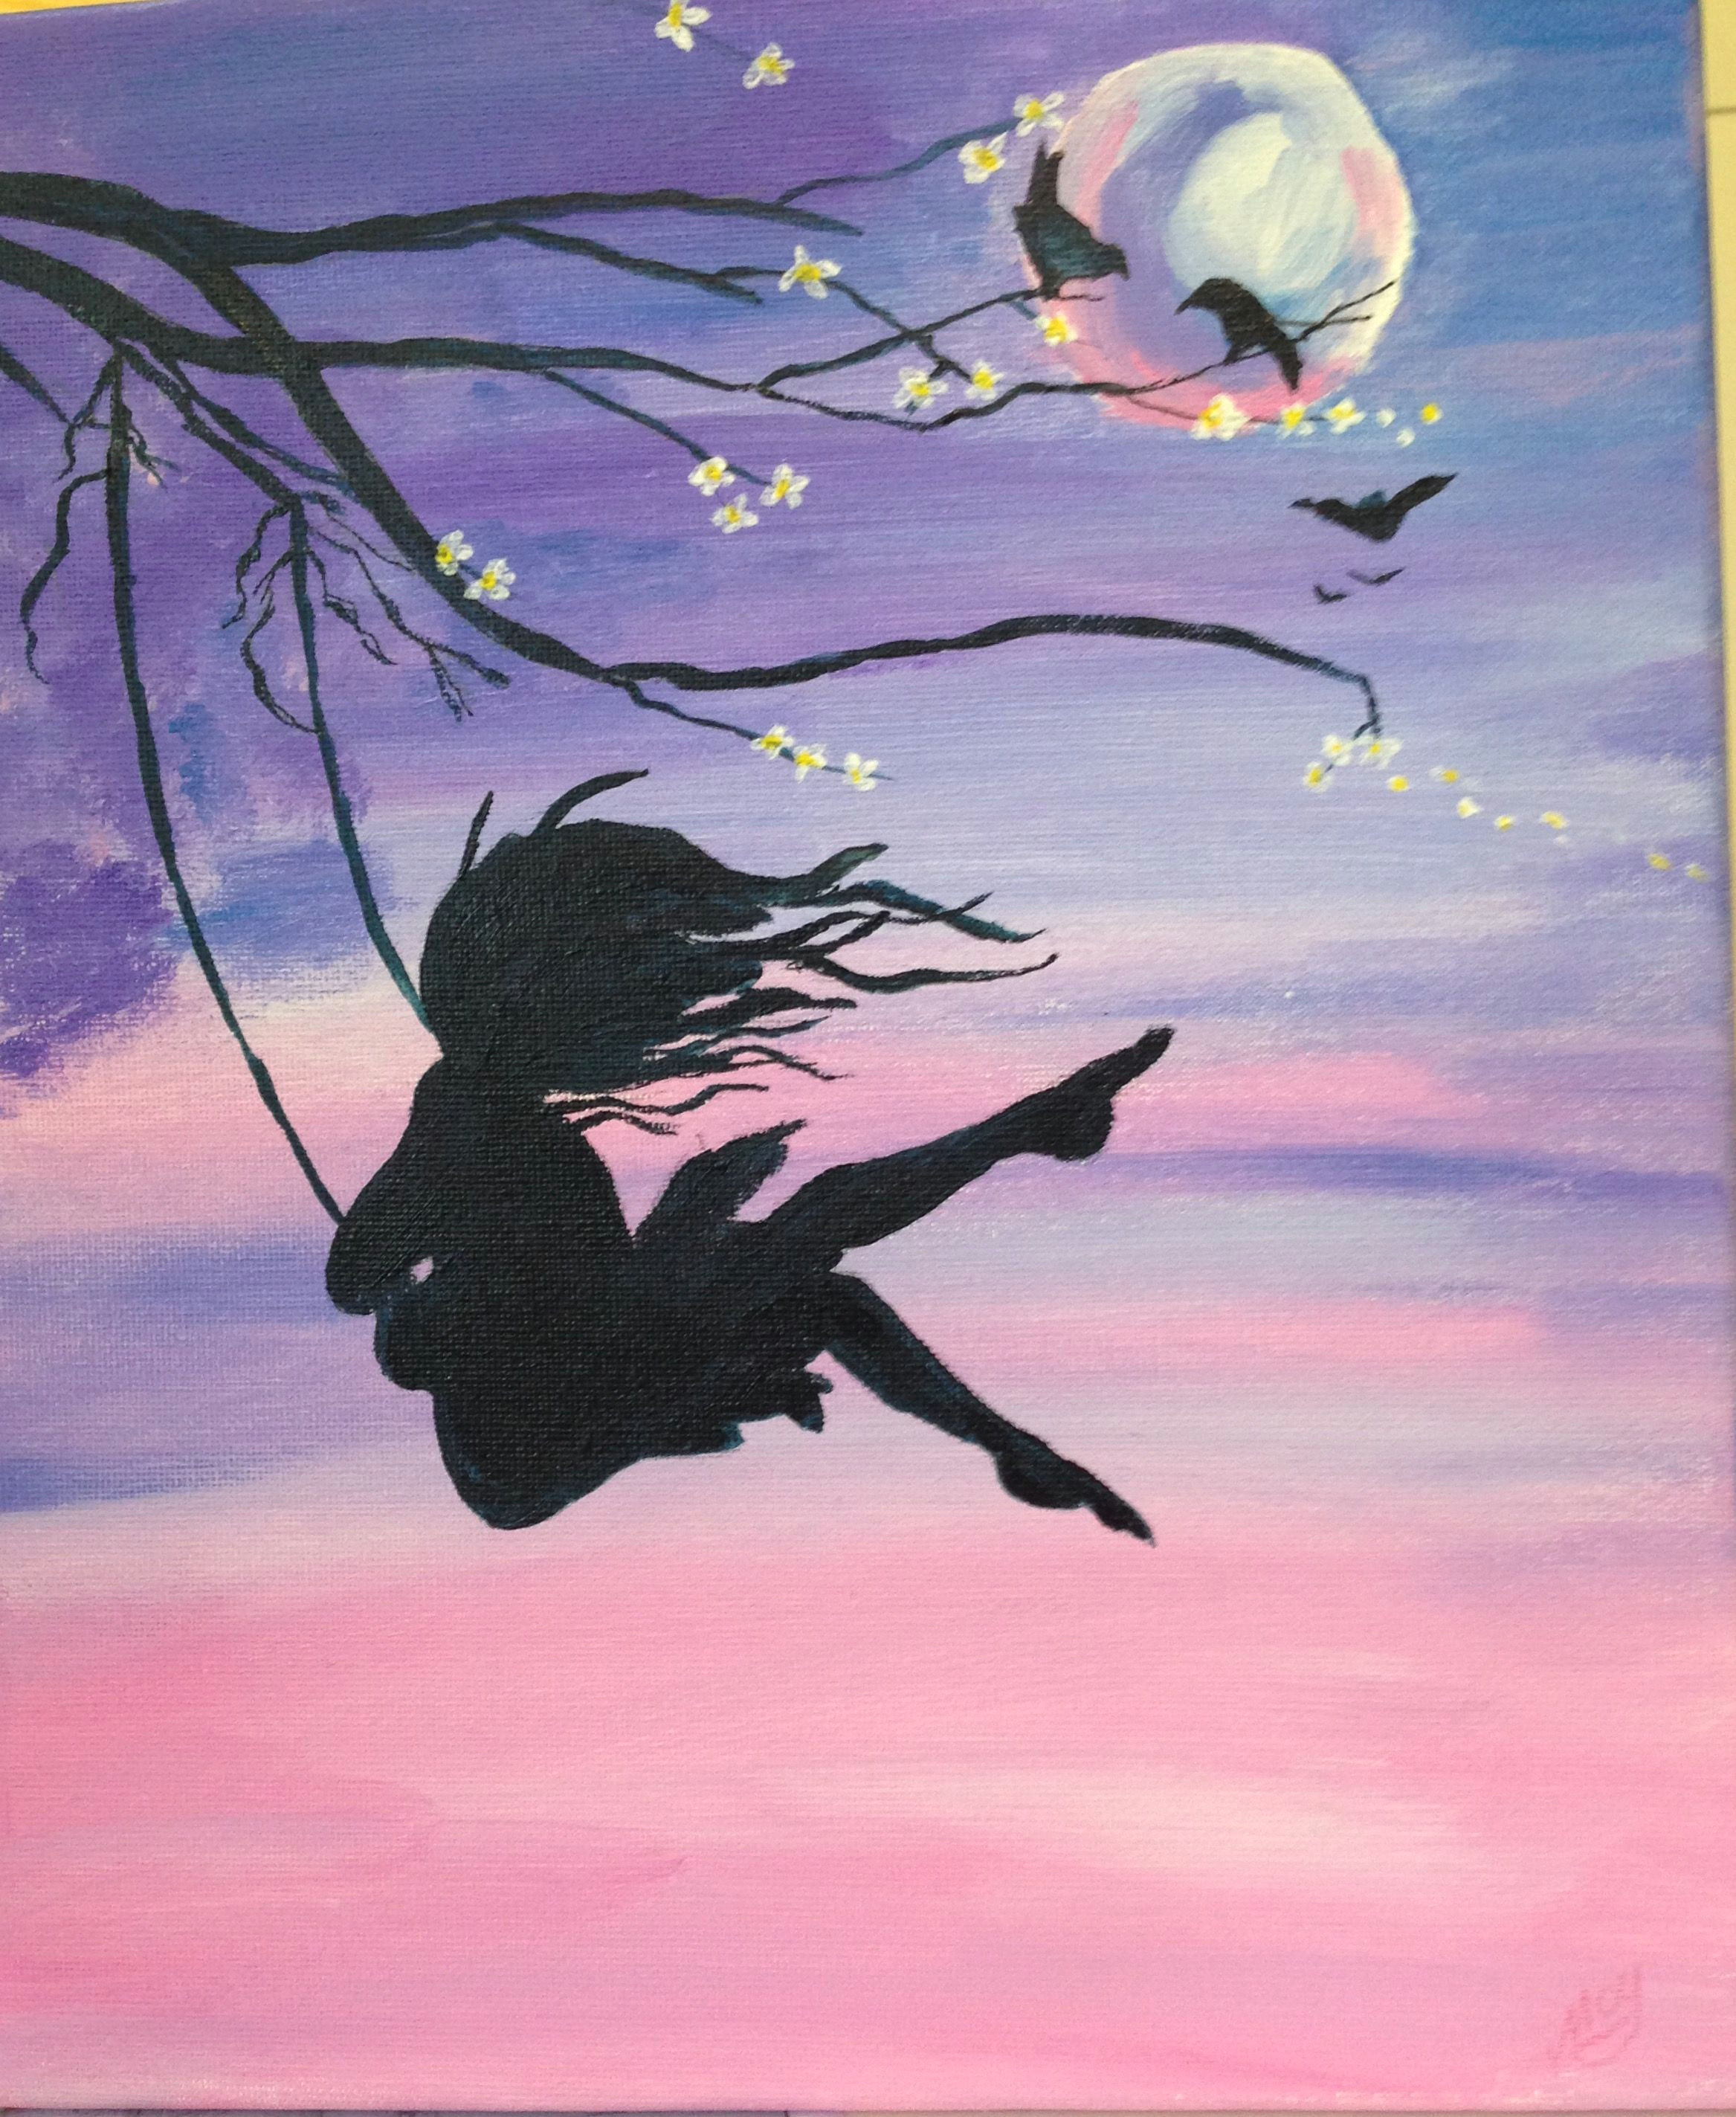 love these girl on the swing paintings had a go at one myself in acrylics